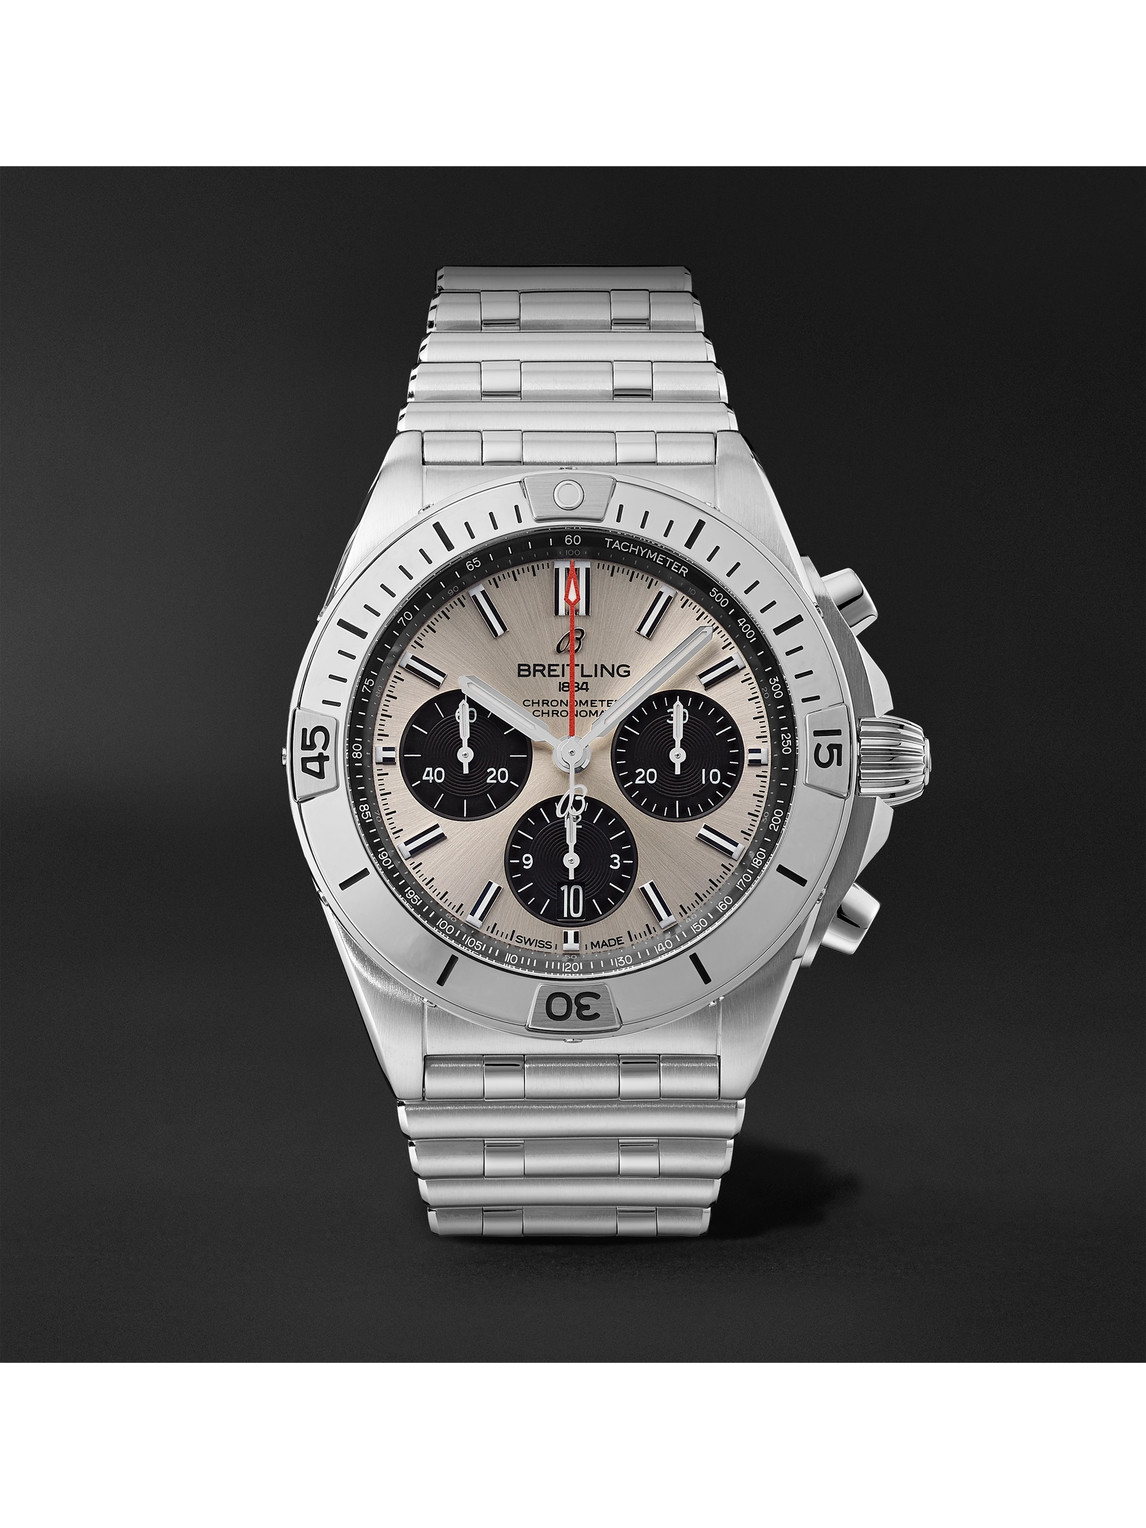 Breitling Chronomat B01 Automatic Chronograph 42mm Stainless Steel Watch, Ref. No. Ab0134101g1a1 In Silver